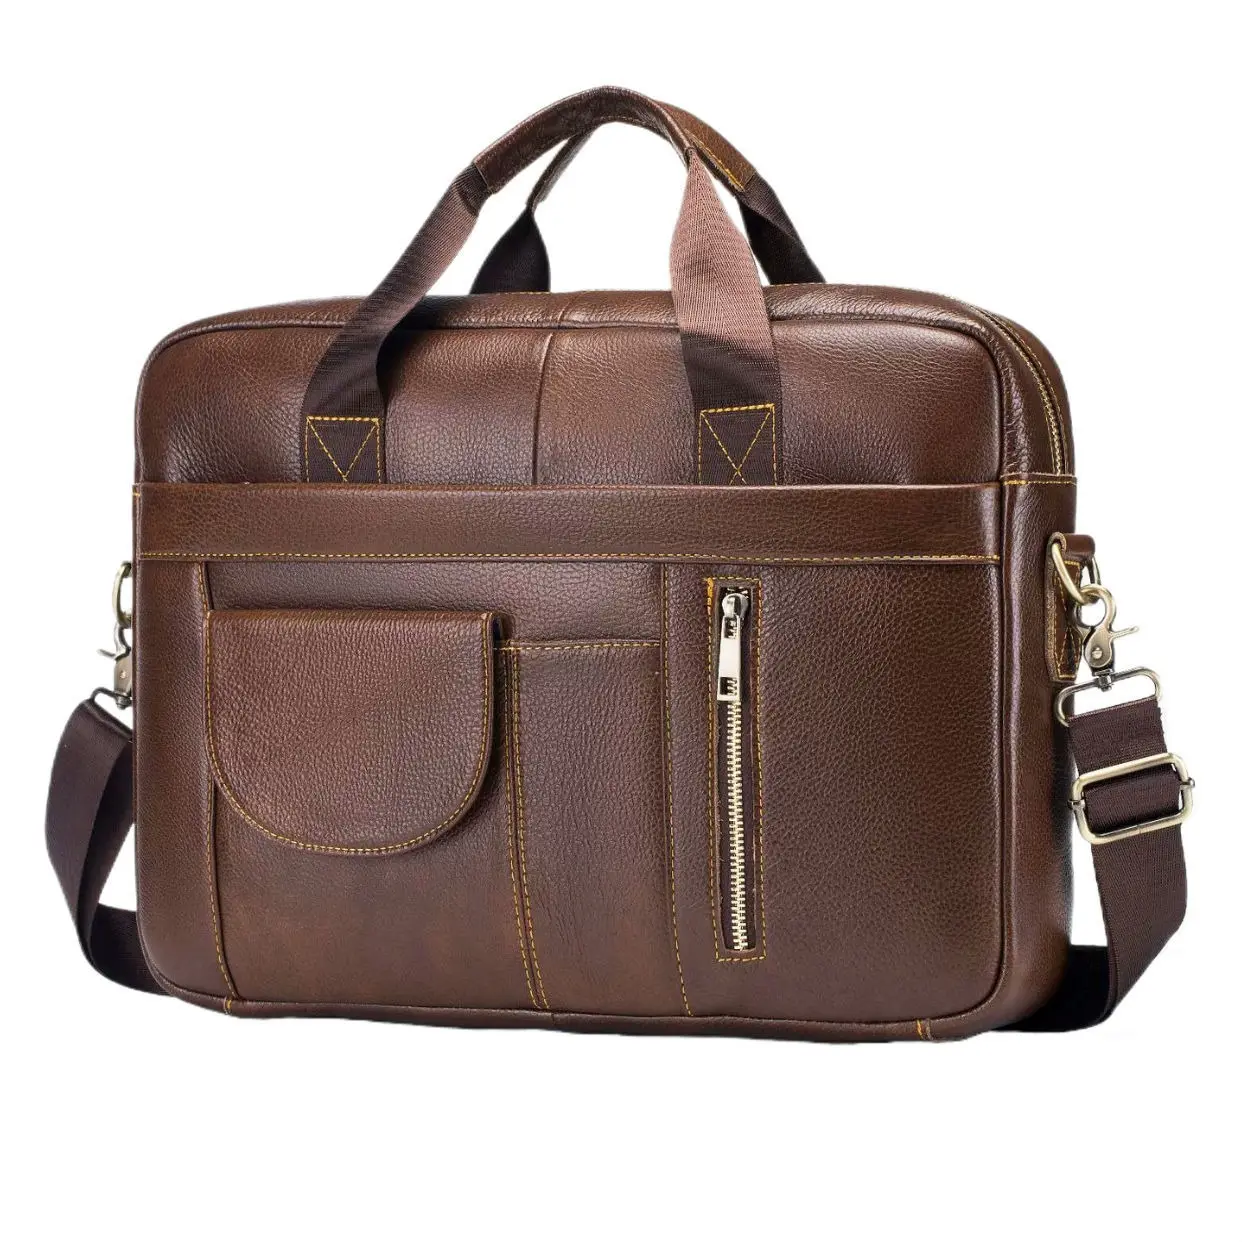 Fashion Wholesale Men'S Handbags Business Bags And Genuine Leather Briefcases For Lawyers